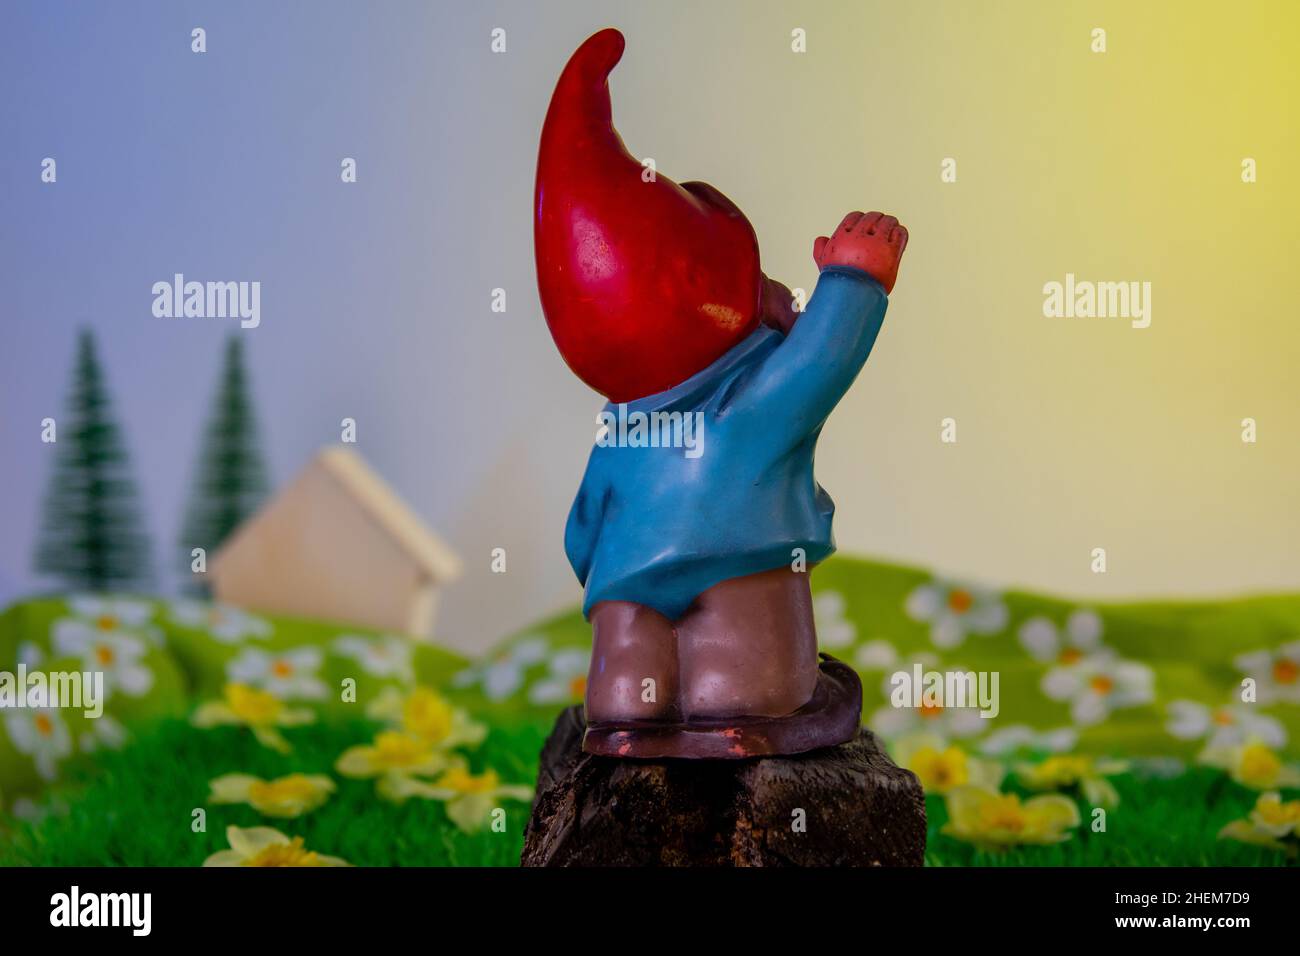 gnom with red bonnet on a flowering meadowland spring still-life Stock Photo